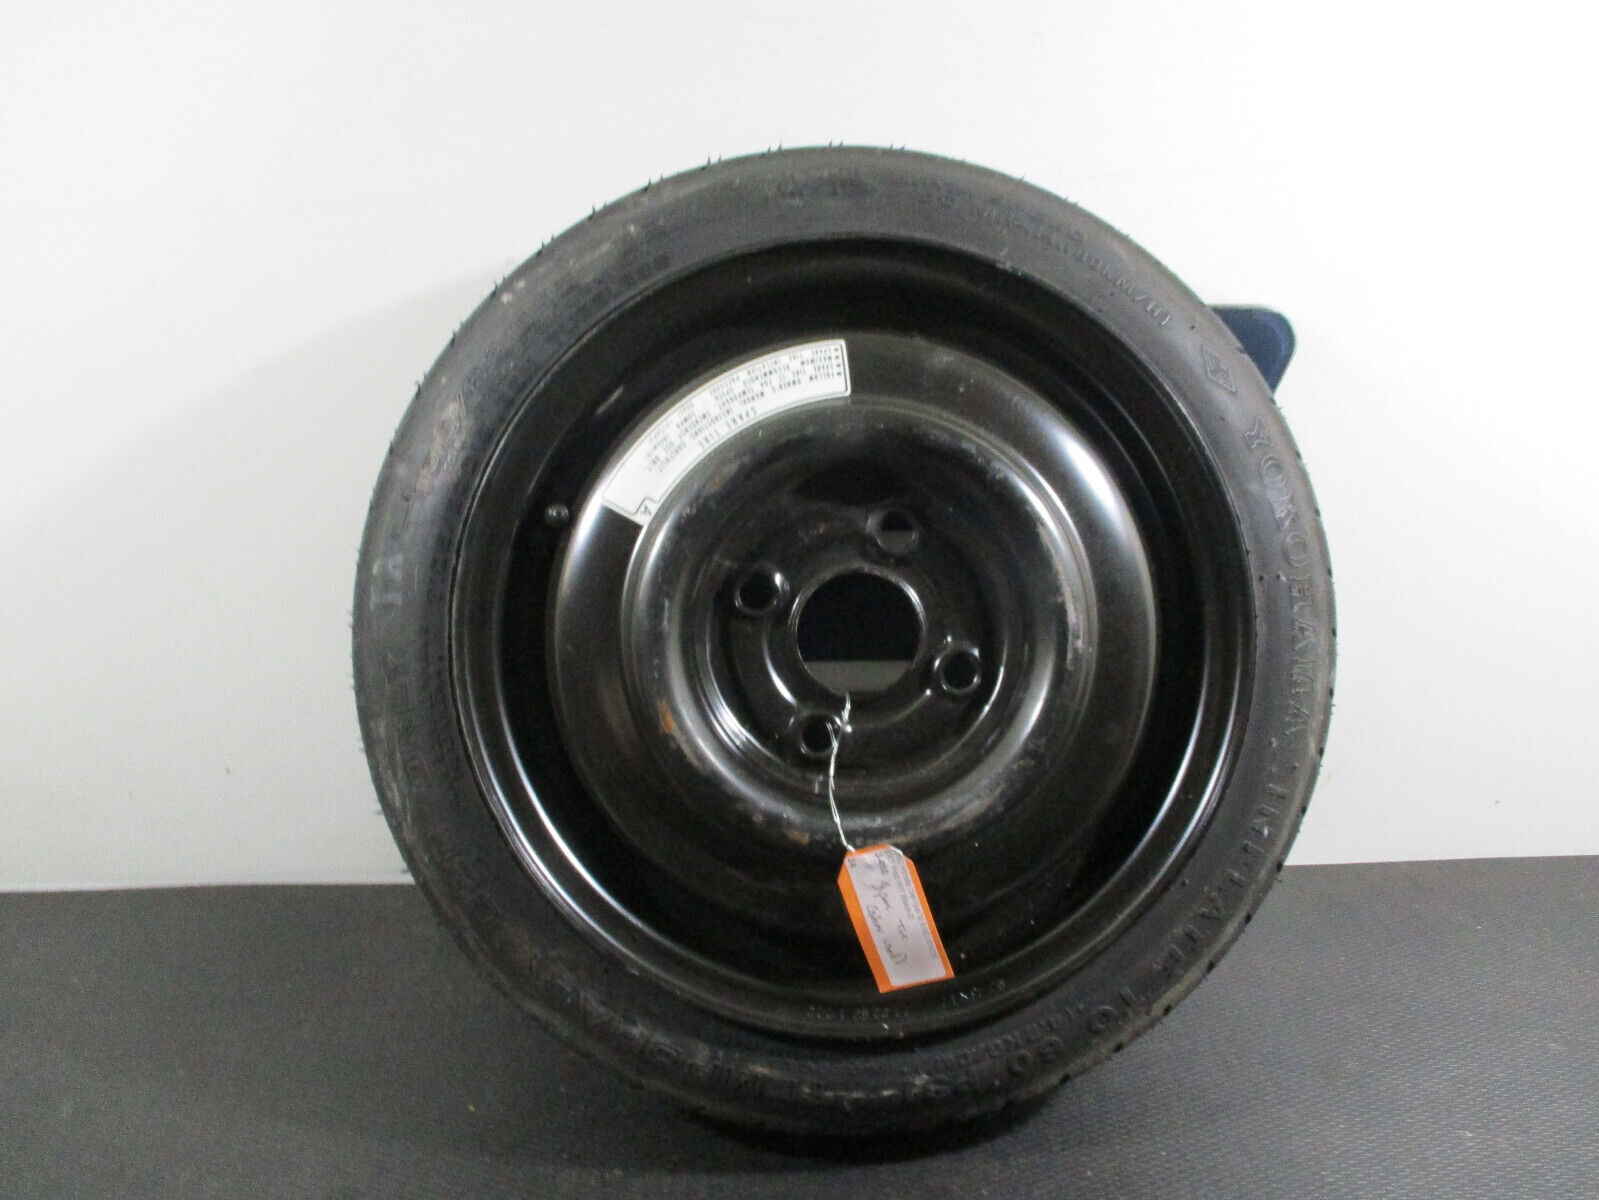 1993 Honda Civic Del Sol - Space Saver Spare Tire (T105/80D13)(Never Used)